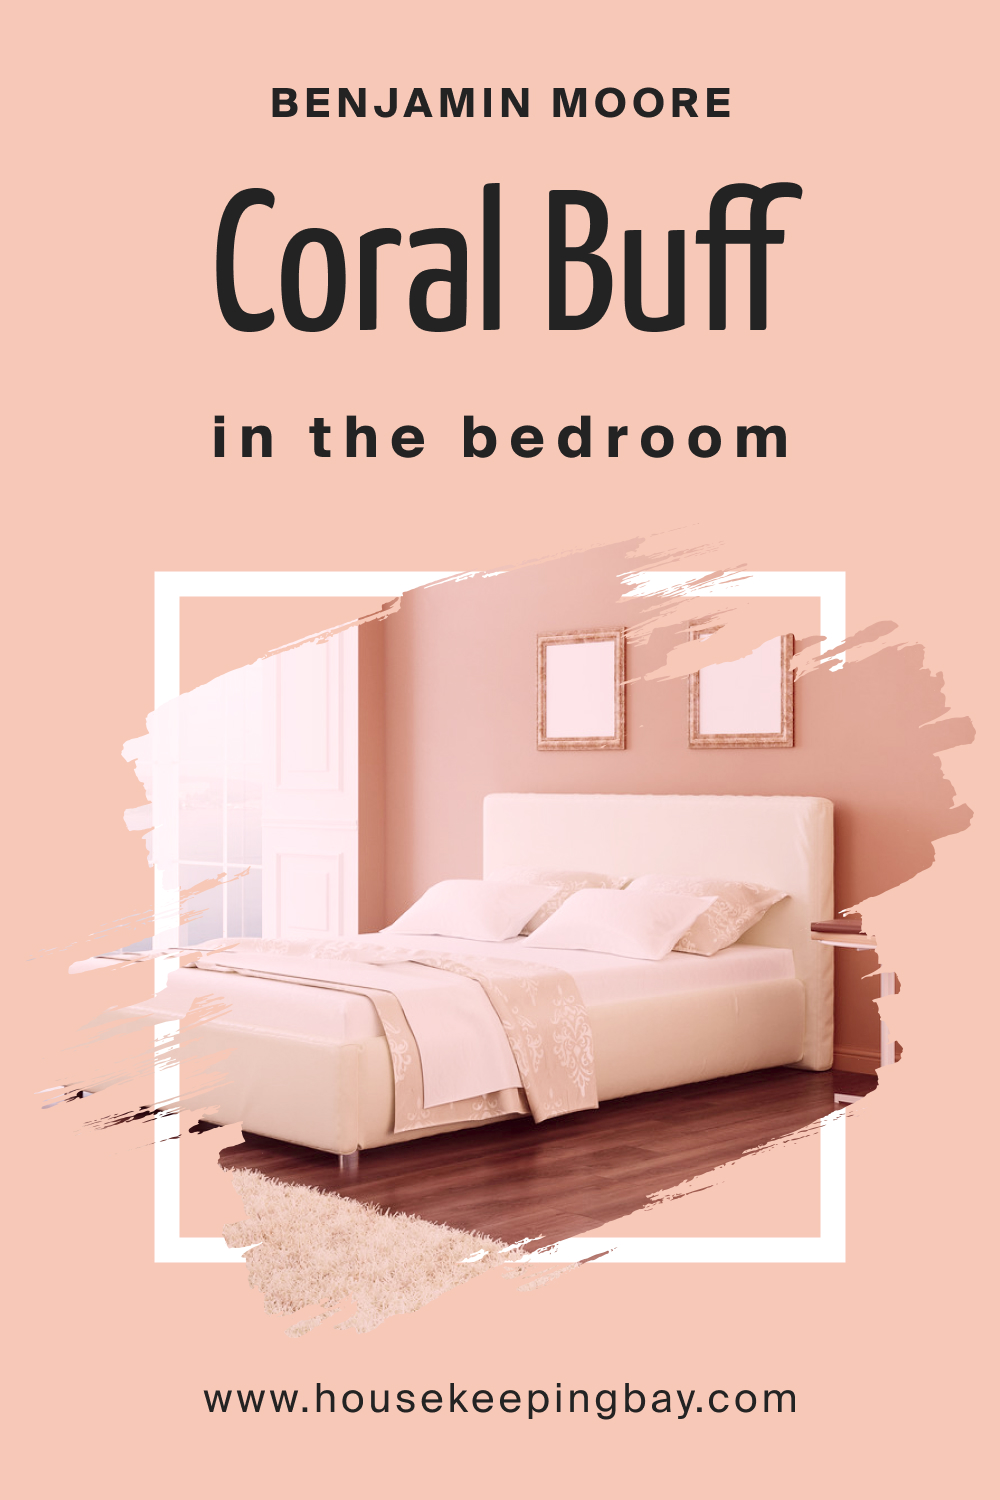 Benjamin Moore. Coral Buff 024 for the Bedroom